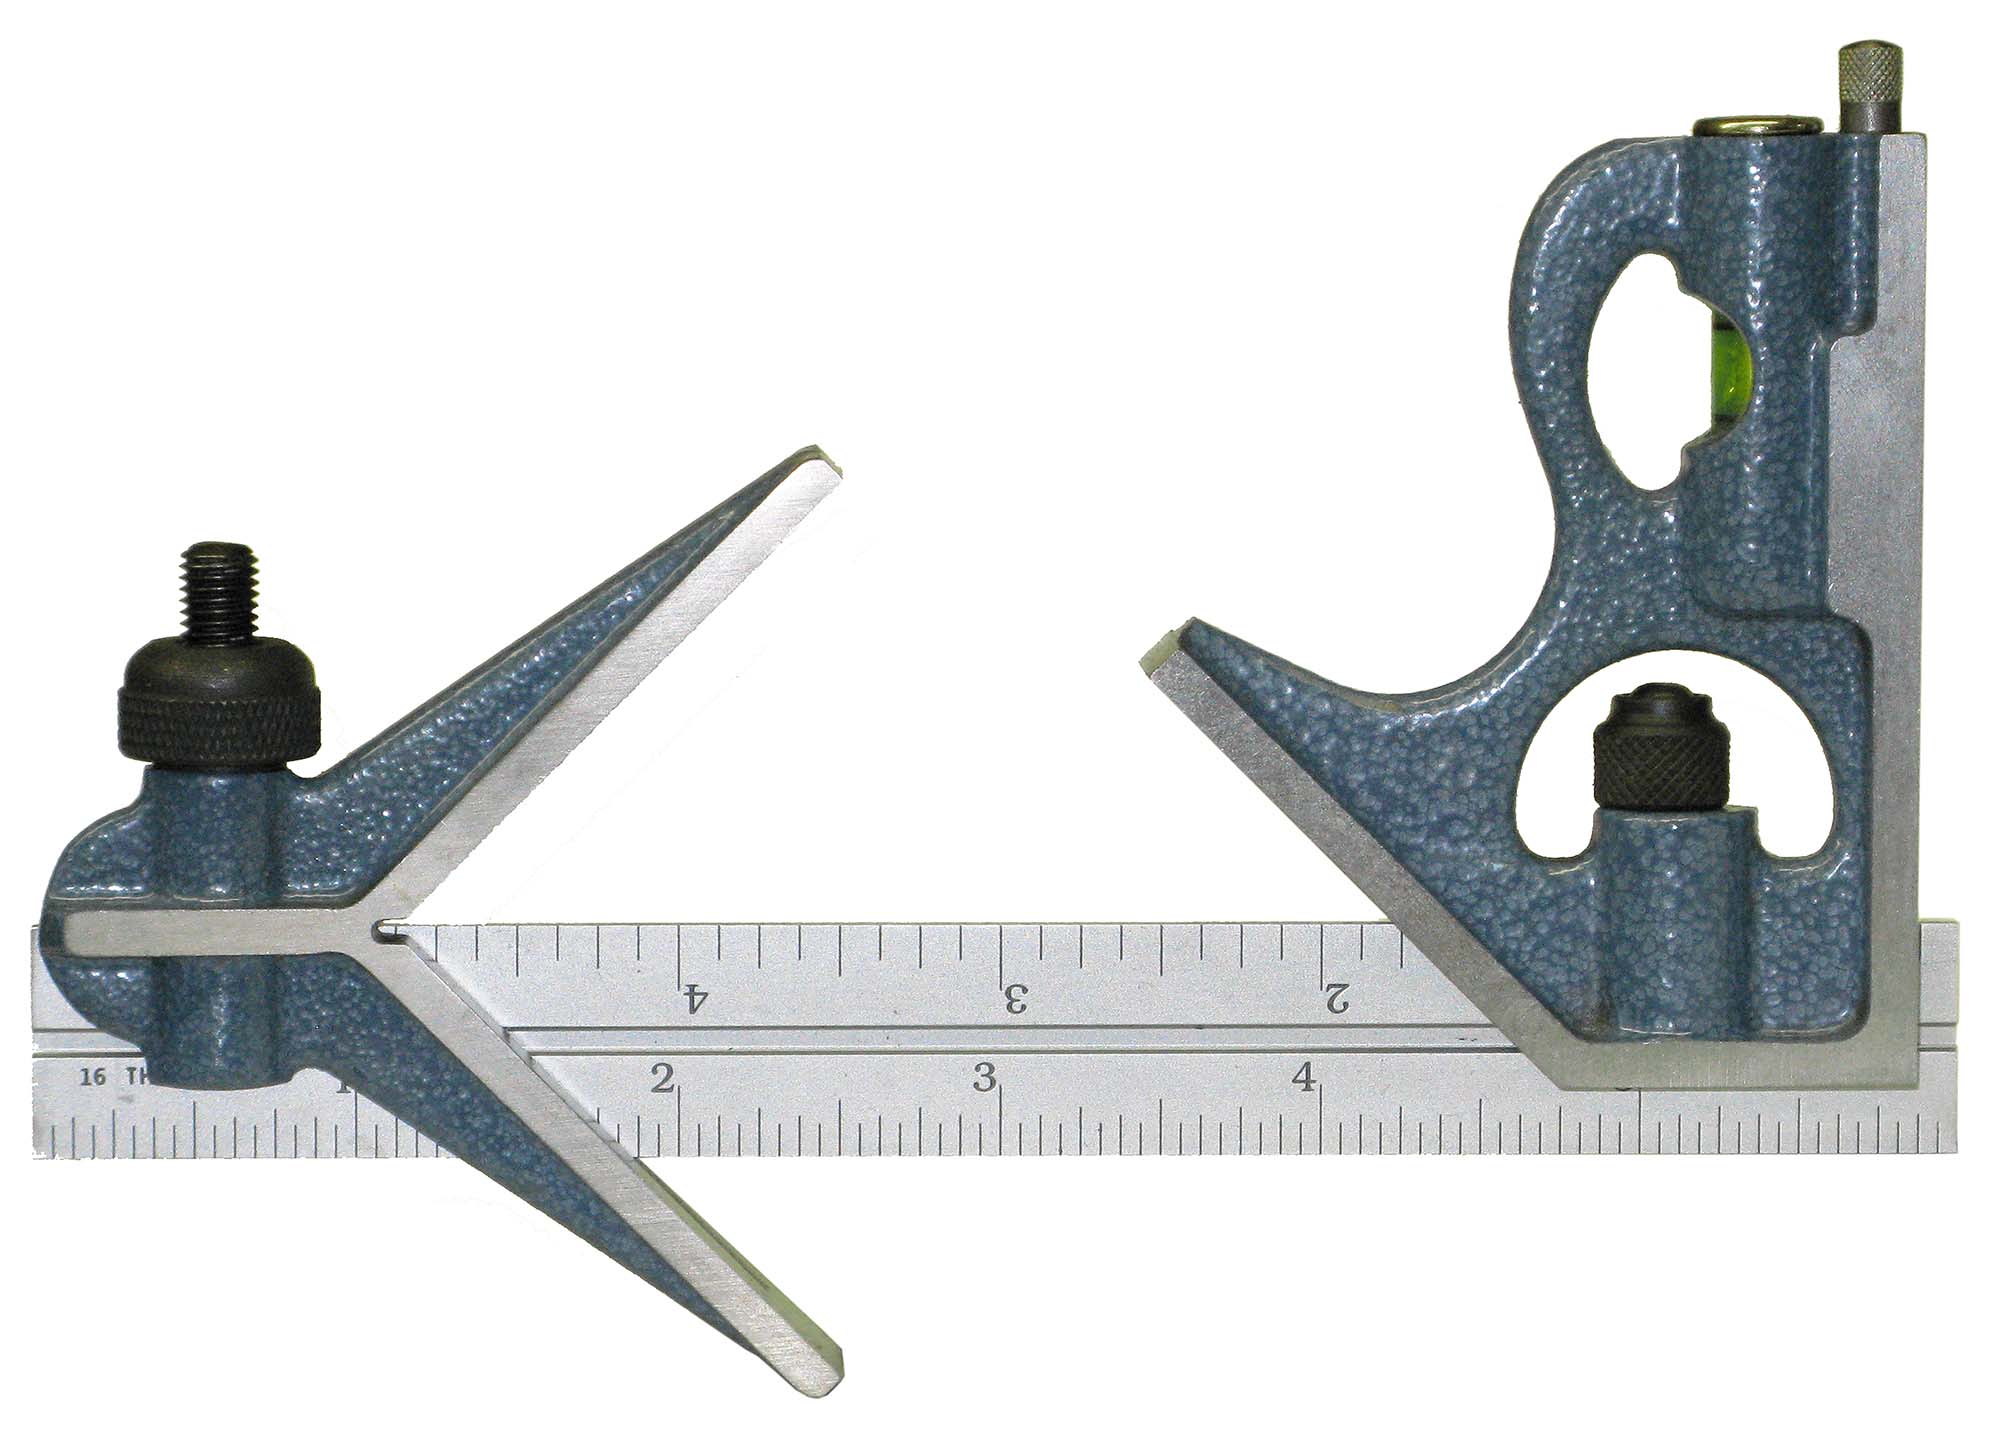 PEC Tools 7122-006  4R Combination Square 6" 3 Piece Set (no protractor head), reads 32nds, 64ths, 8ths, 16ths.